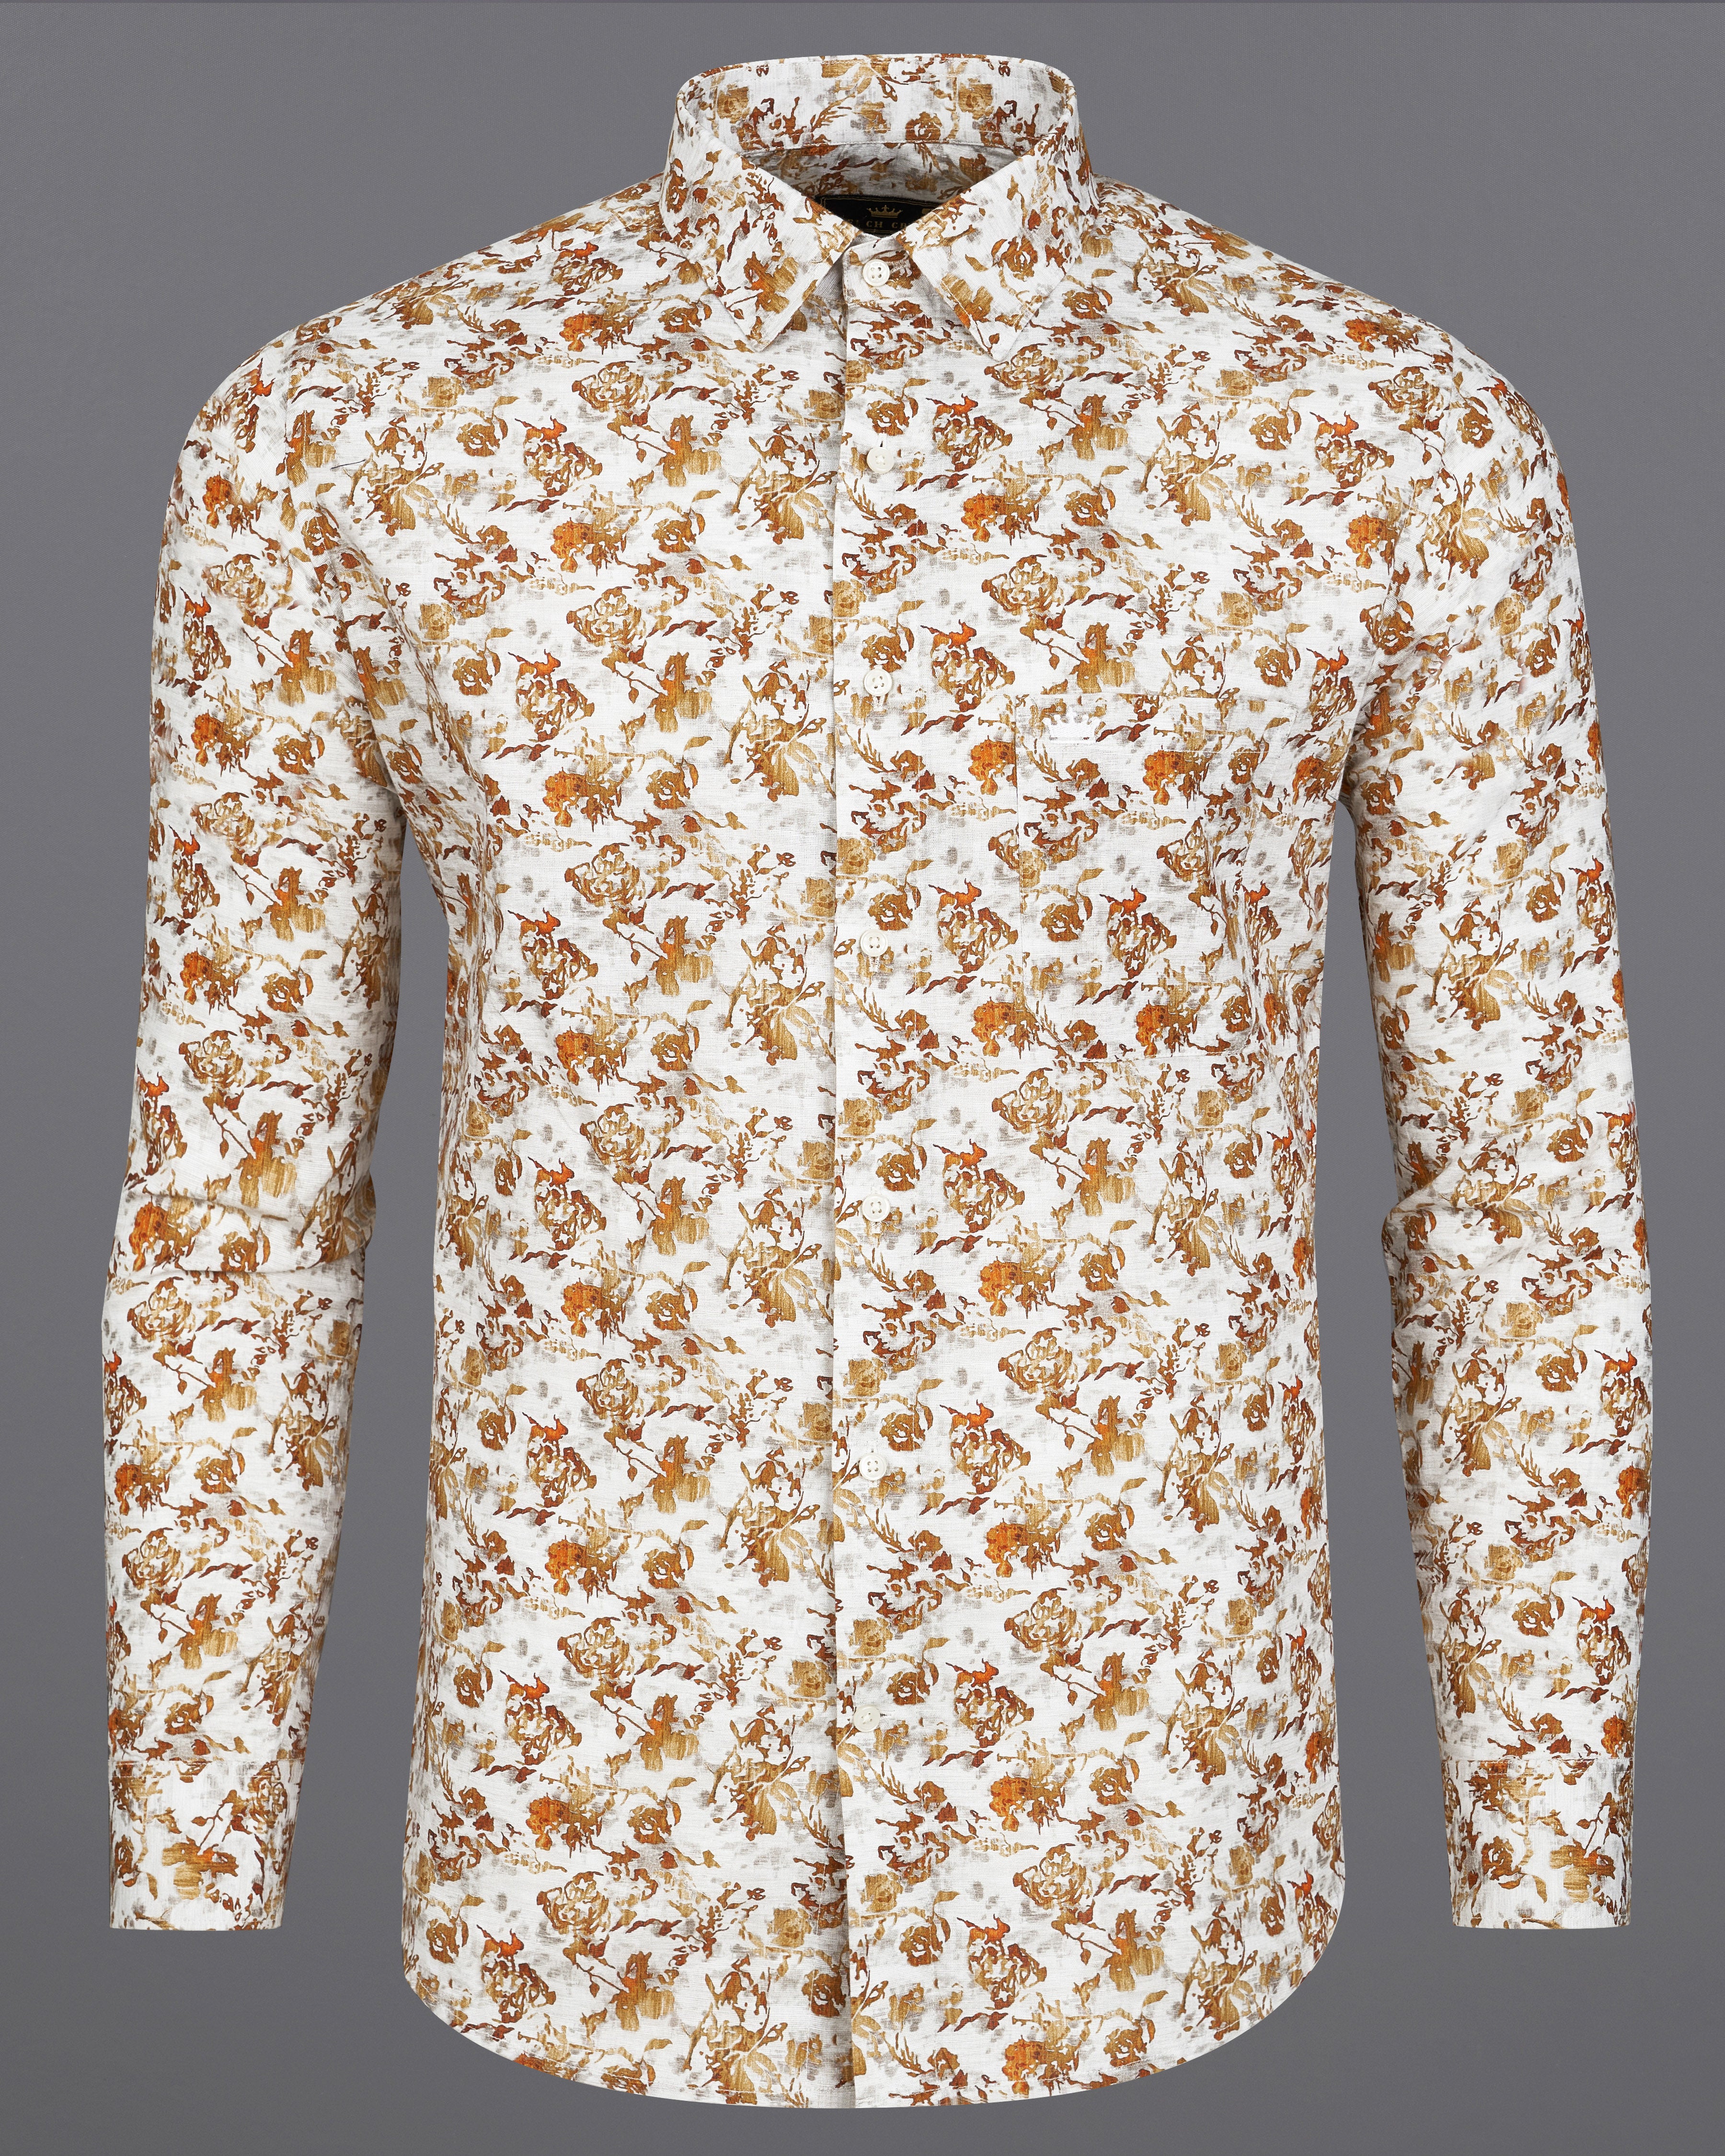 Bright White with Leather Brown Printed Premium Cotton Shirt 9092-38, 9092-H-38, 9092-39, 9092-H-39, 9092-40, 9092-H-40, 9092-42, 9092-H-42, 9092-44, 9092-H-44, 9092-46, 9092-H-46, 9092-48, 9092-H-48, 9092-50, 9092-H-50, 9092-52, 9092-H-52